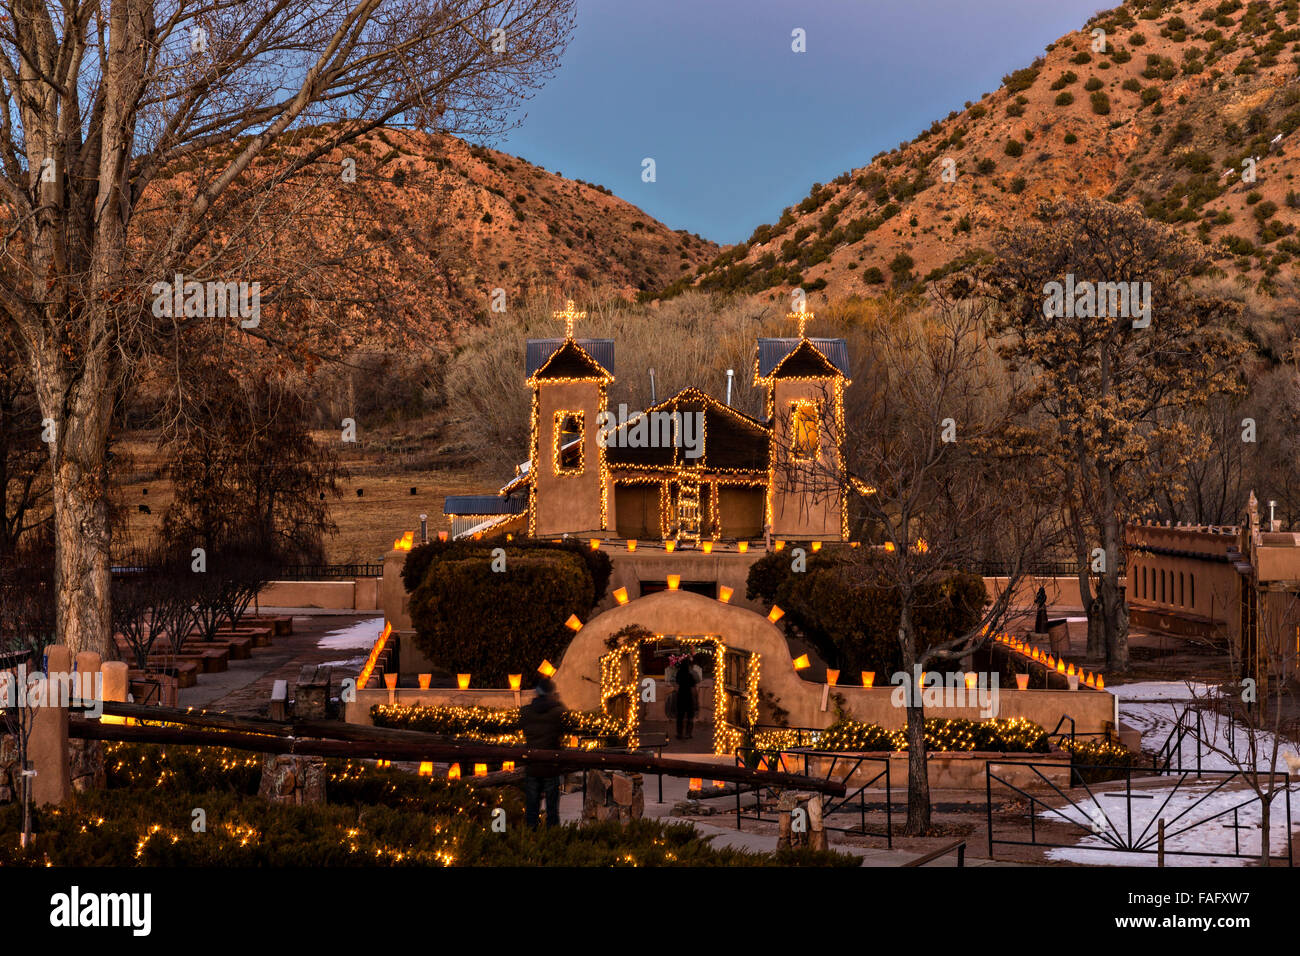 El Santuario de Chimayo Historic Site illuminated by hundreds of small paper lanterns known as luminaria to celebrate the holiday season December 13, 2015 in Jemez Springs, New Mexico. Each year 30,000 people make pilgrimages to the shrine. Stock Photo